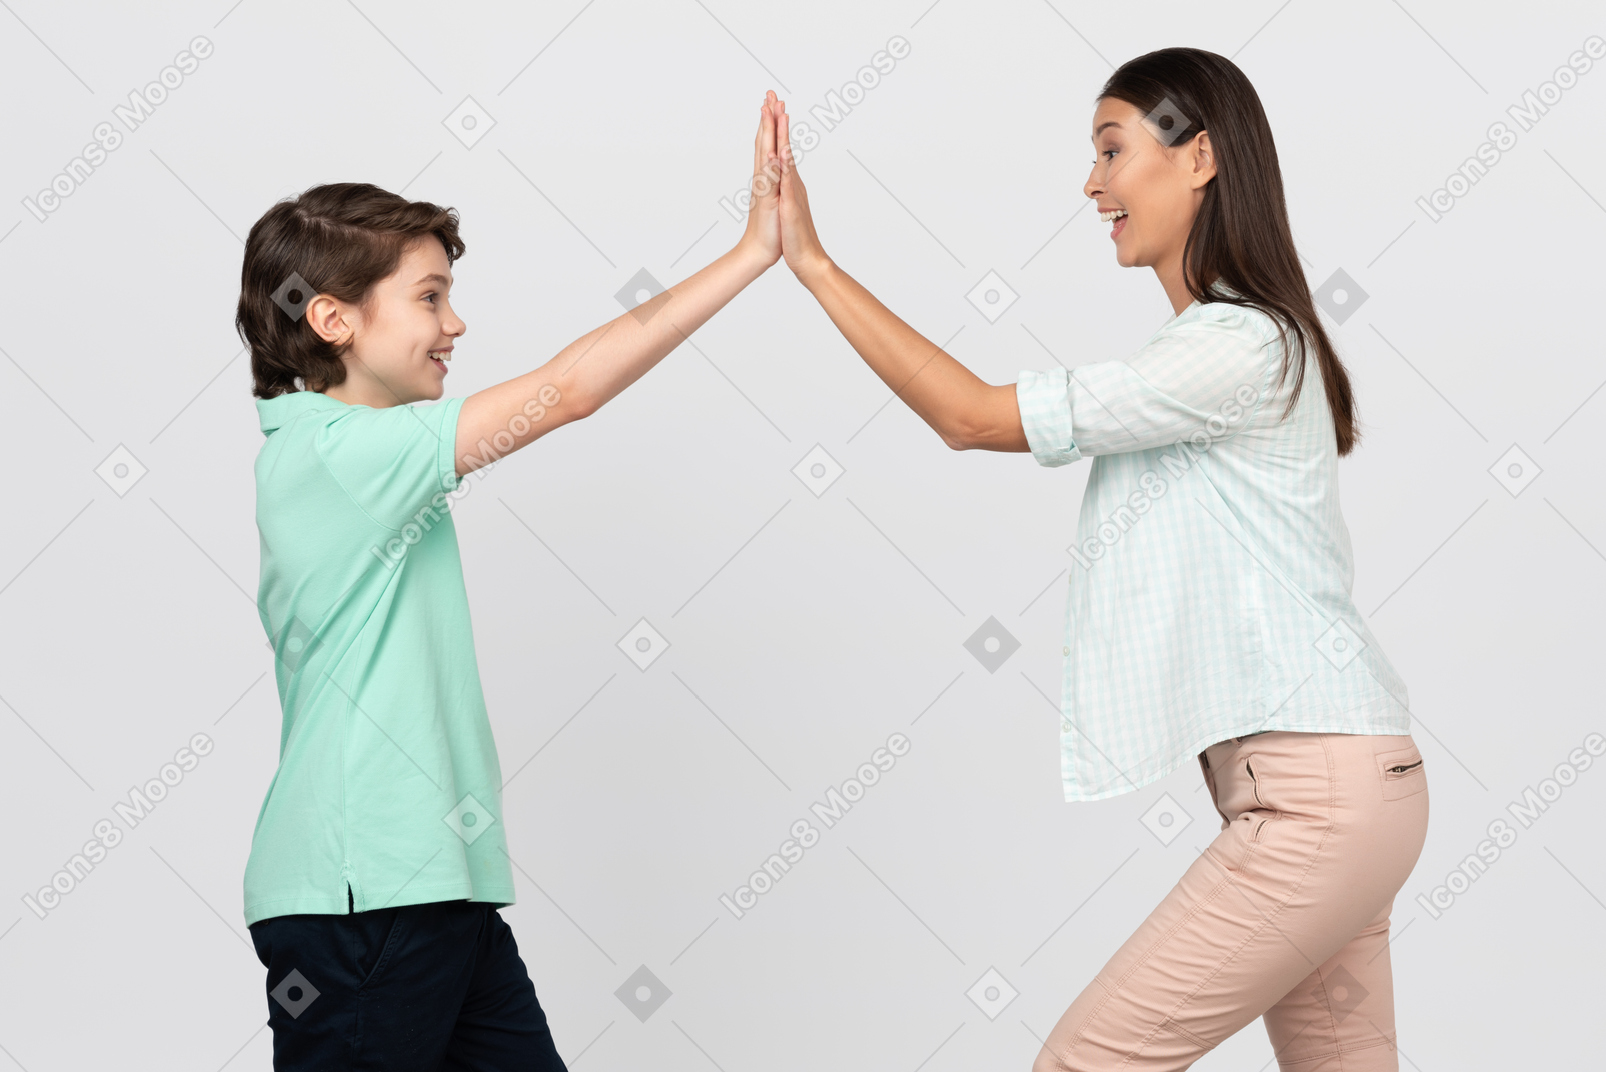 Giving each other a high five